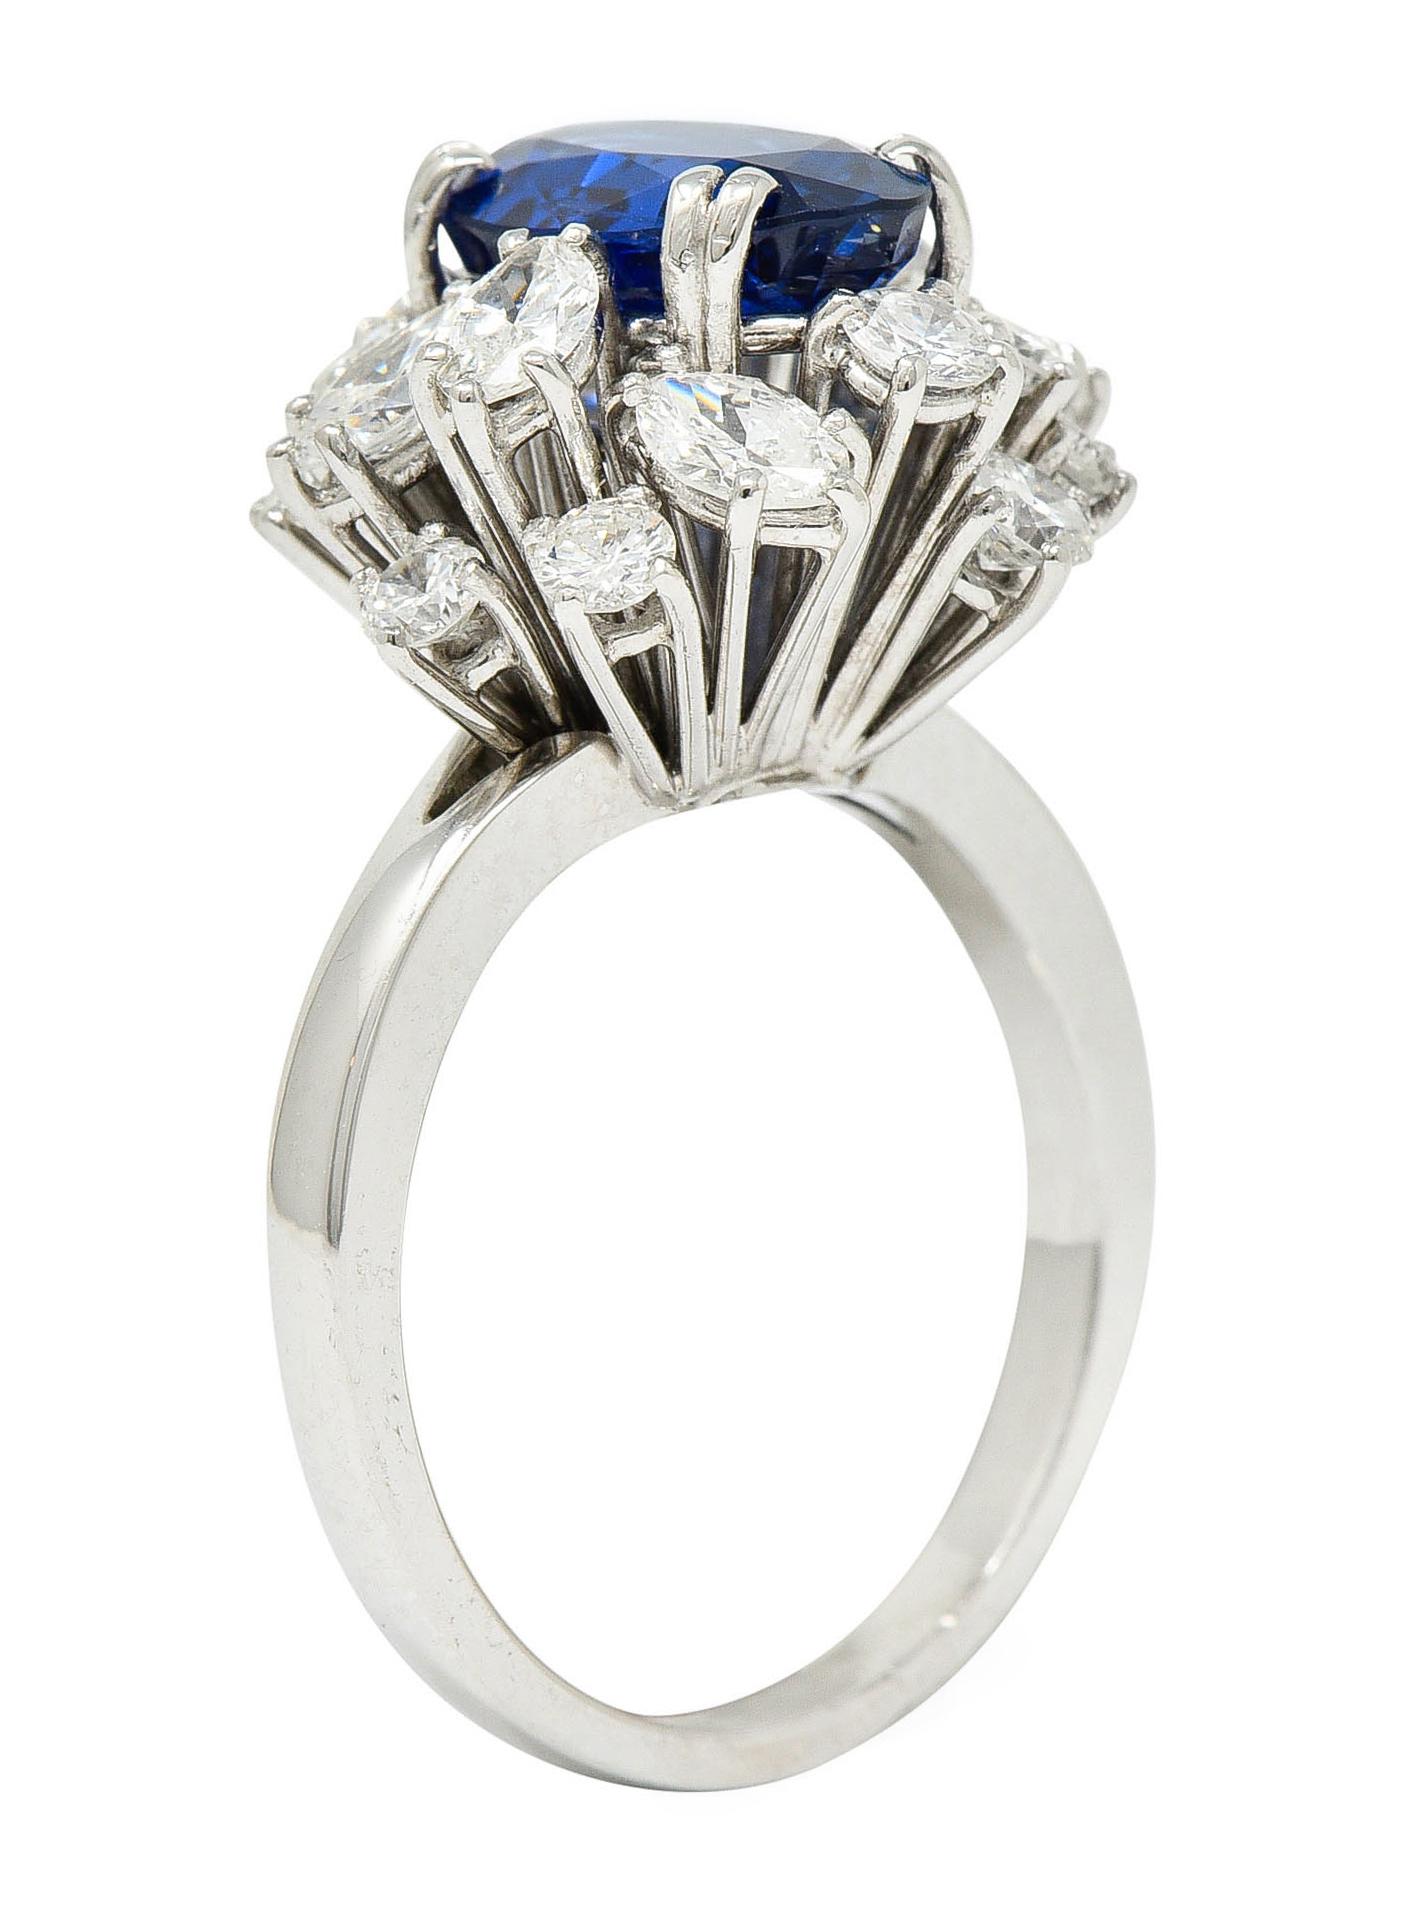 Cluster ring centers an oval mixed cut Burma sapphire weighing 2.61 carats

Bright royal blue in color with no indications of heat

Set by split prongs and surrounded by a cluster of marquise and round brilliant cut diamonds

Weighing in total